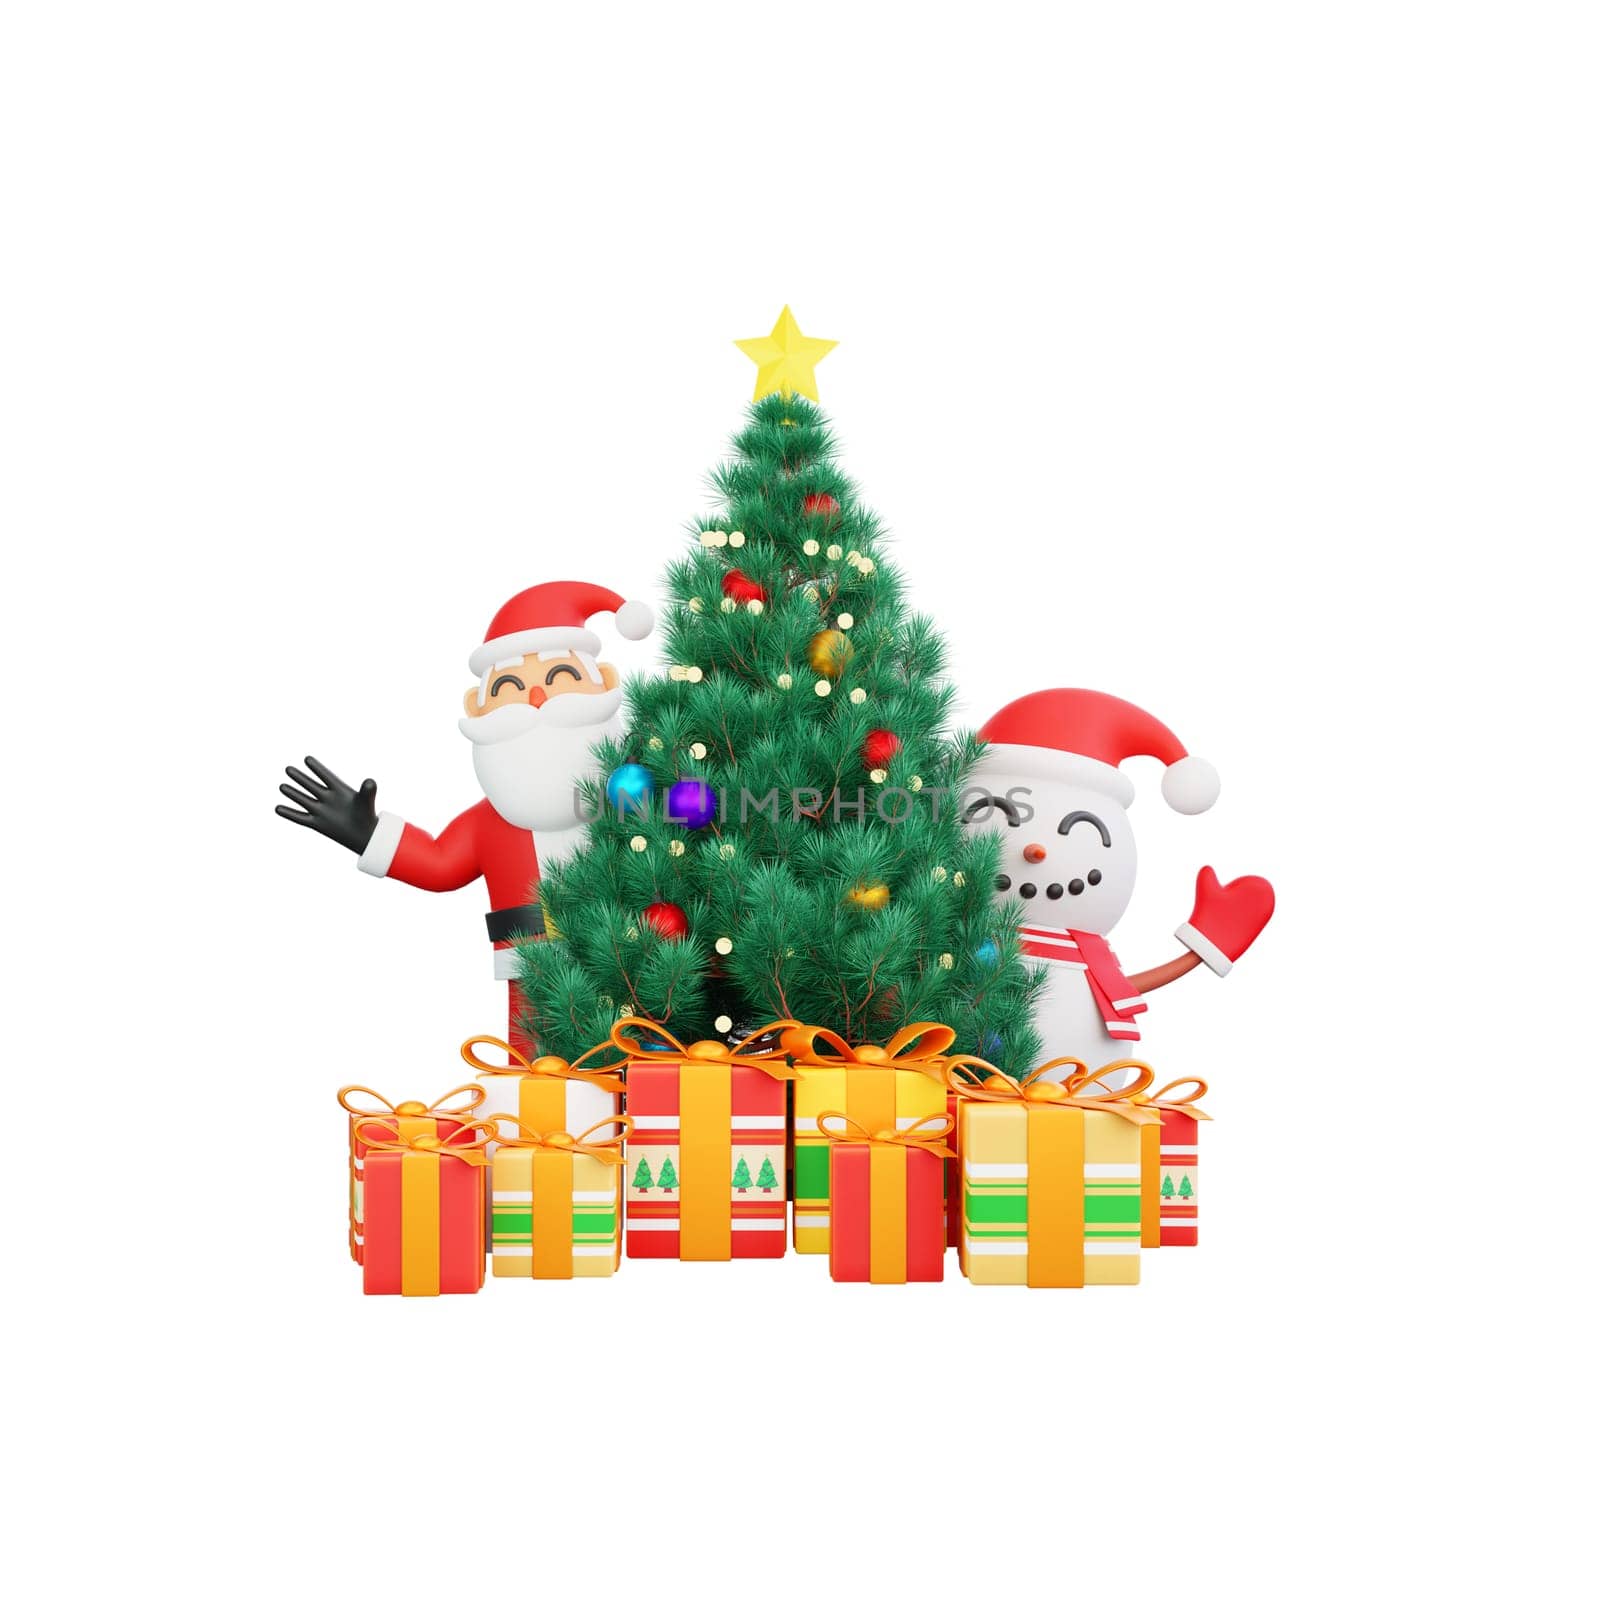 3D rendering Santa Claus and a snowman beside a beautifully decorated Christmas tree, surrounded by a variety of colorful gifts. Perfect for holiday themed designs and Christmas celebrations